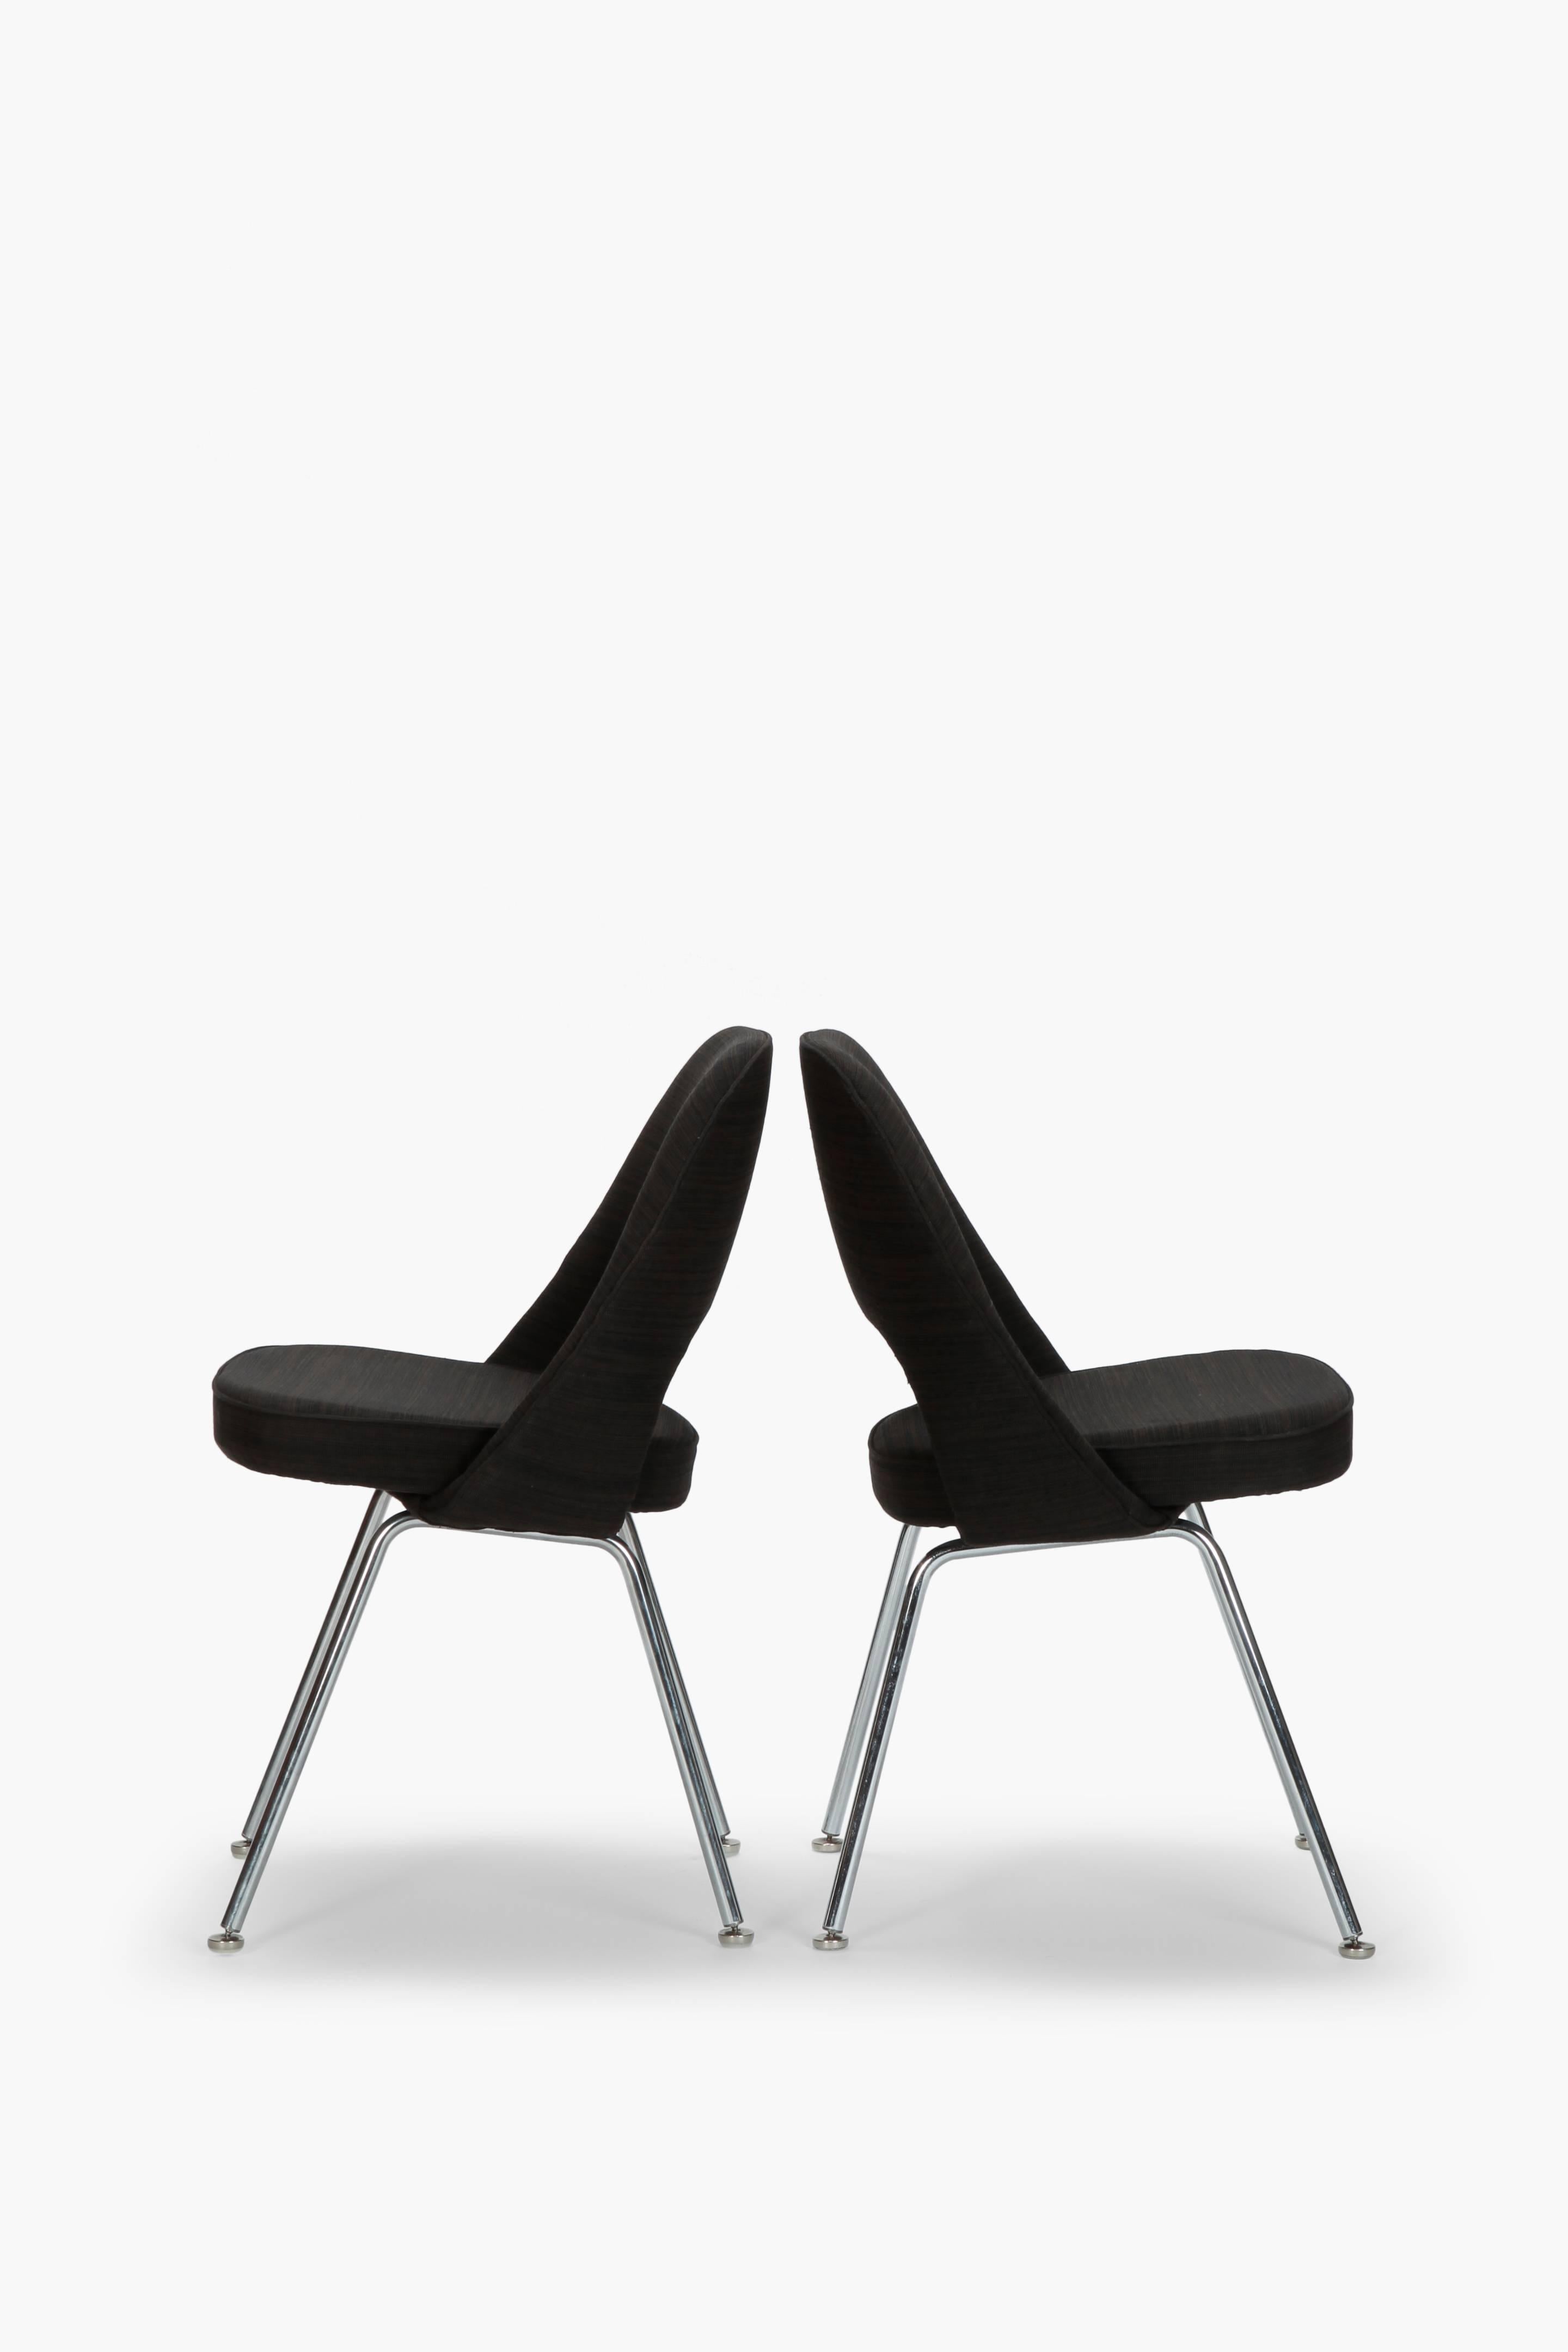 Pair of Eero Saarinen chairs manufactured by Knoll International in the 1950s.